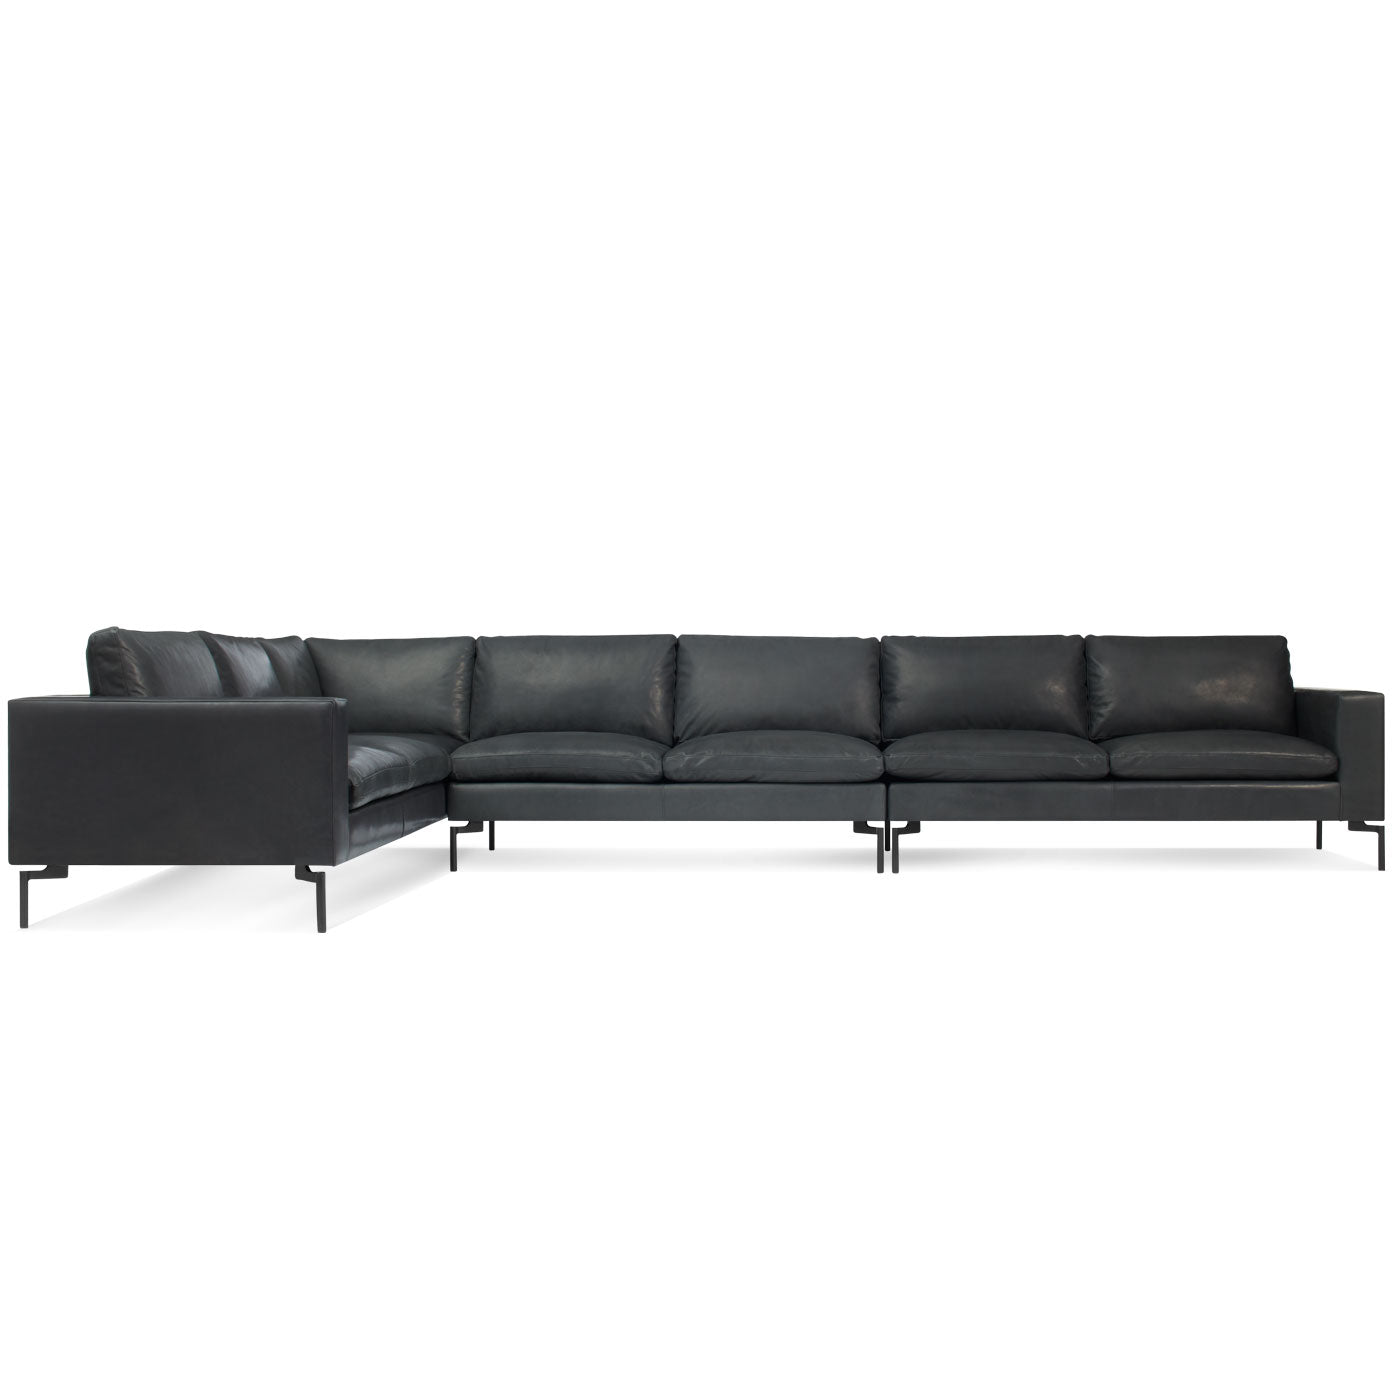 New Standard 162" Leather Sofa Sectional